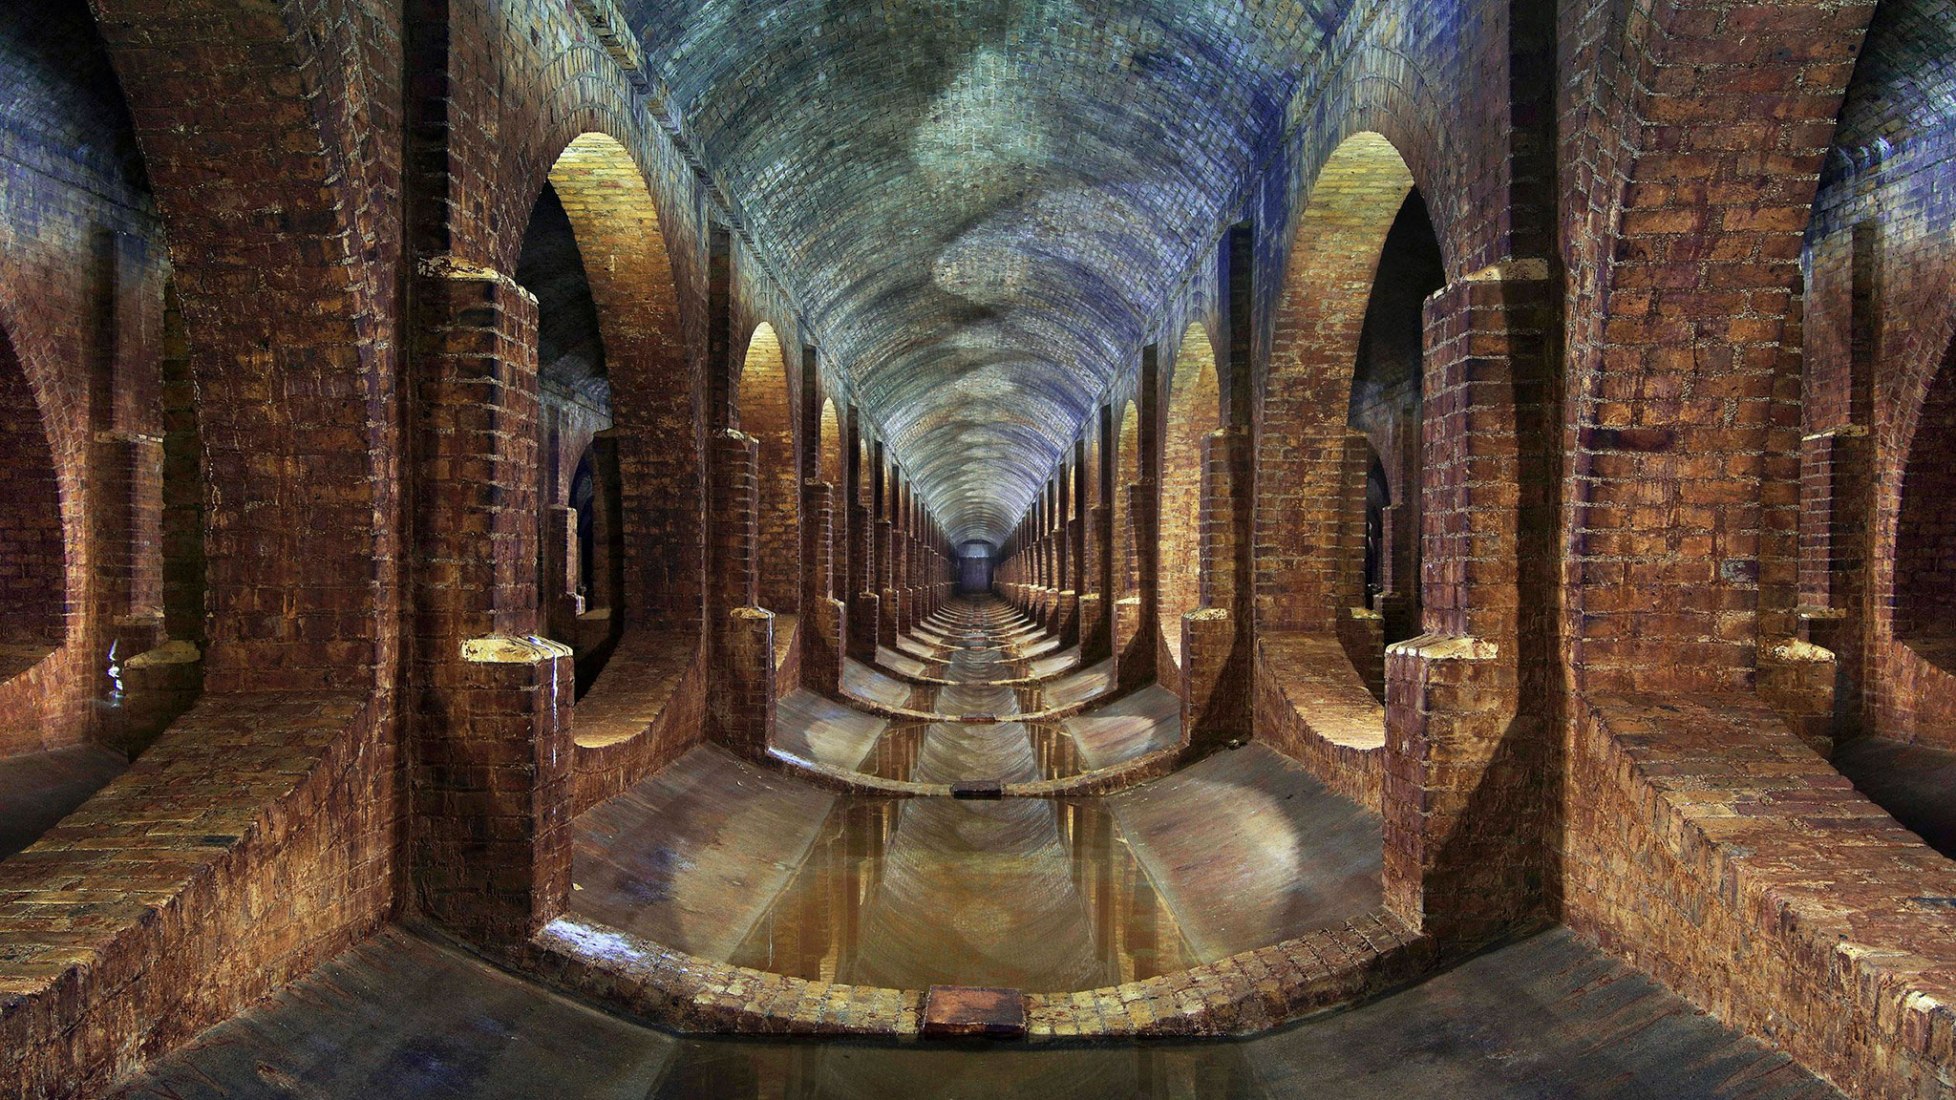 London. Brick arches of the covered reservoir, by the East London Waterworks Company in 1868. Photograph @ Matt Emmett